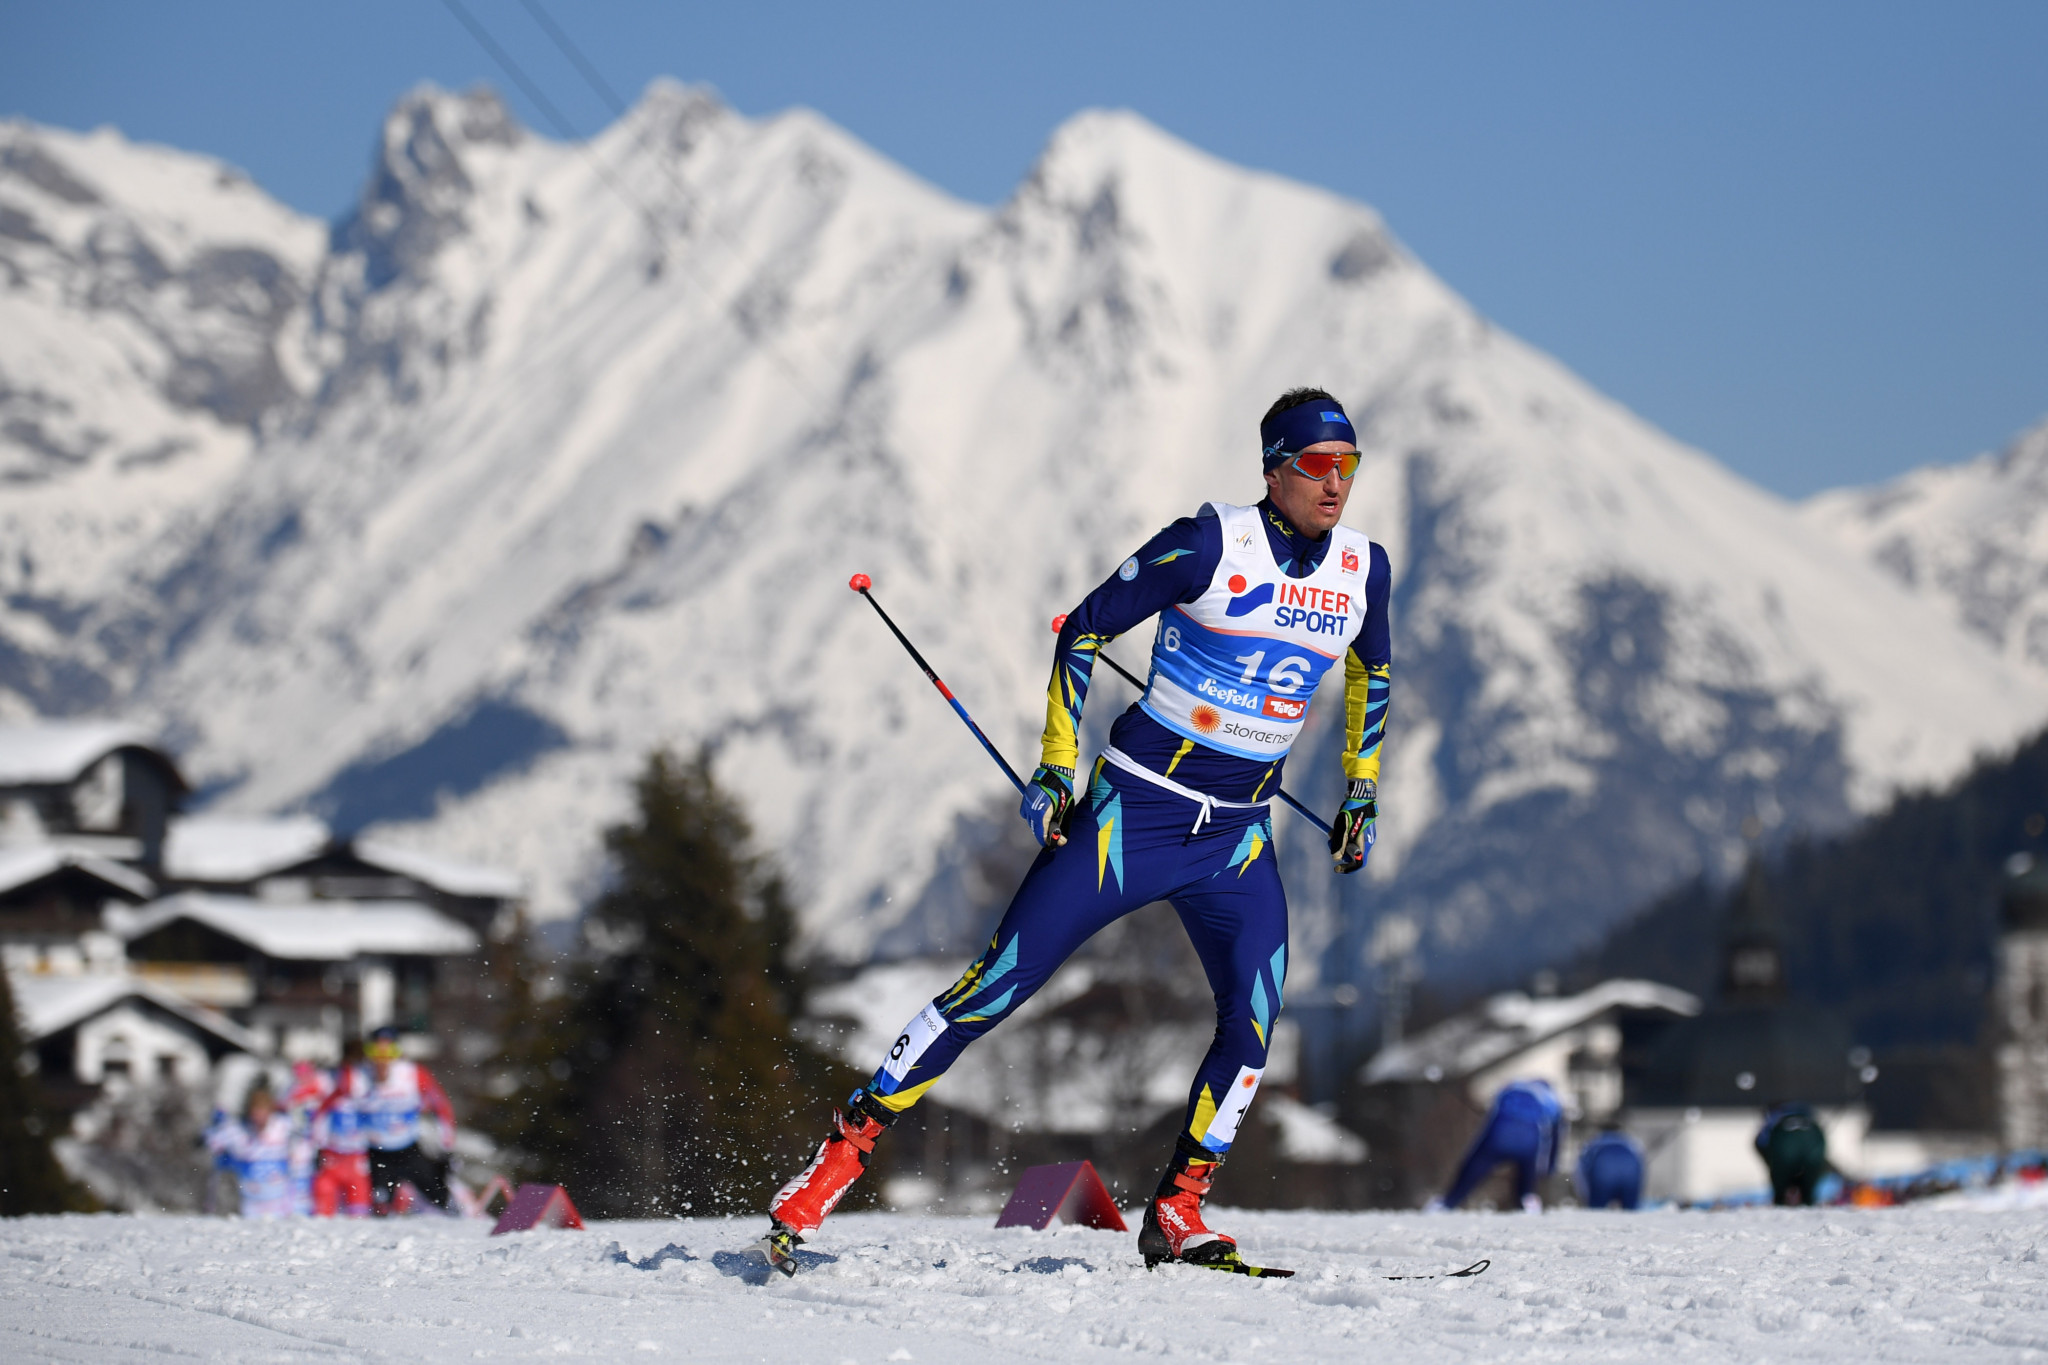 Son of double Olympic champion among athletes arrested at FIS Nordic World Ski Championships